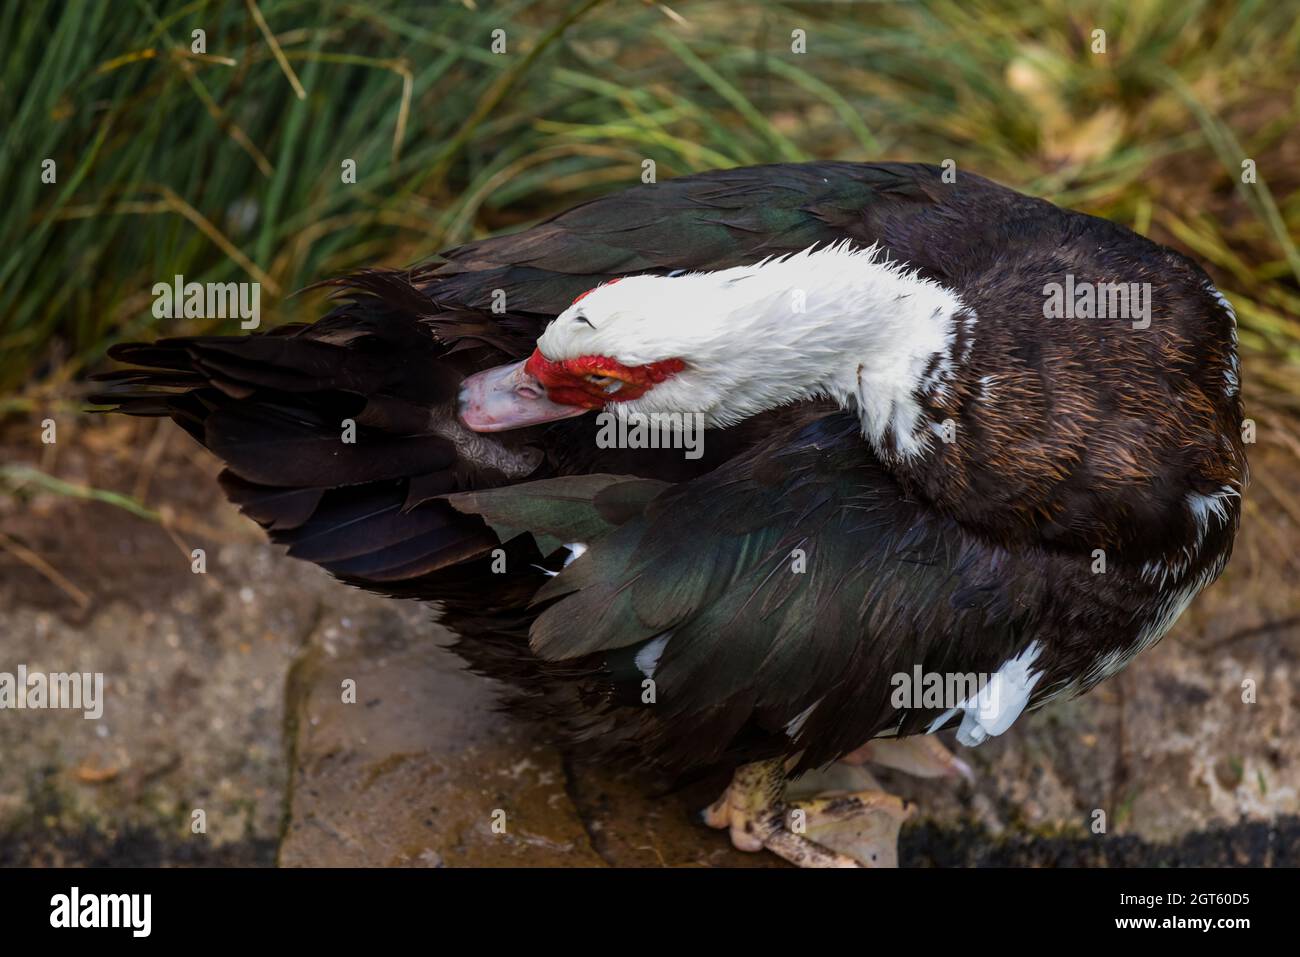 Muscovy Duck with red face and black and white feathers Stock Photo